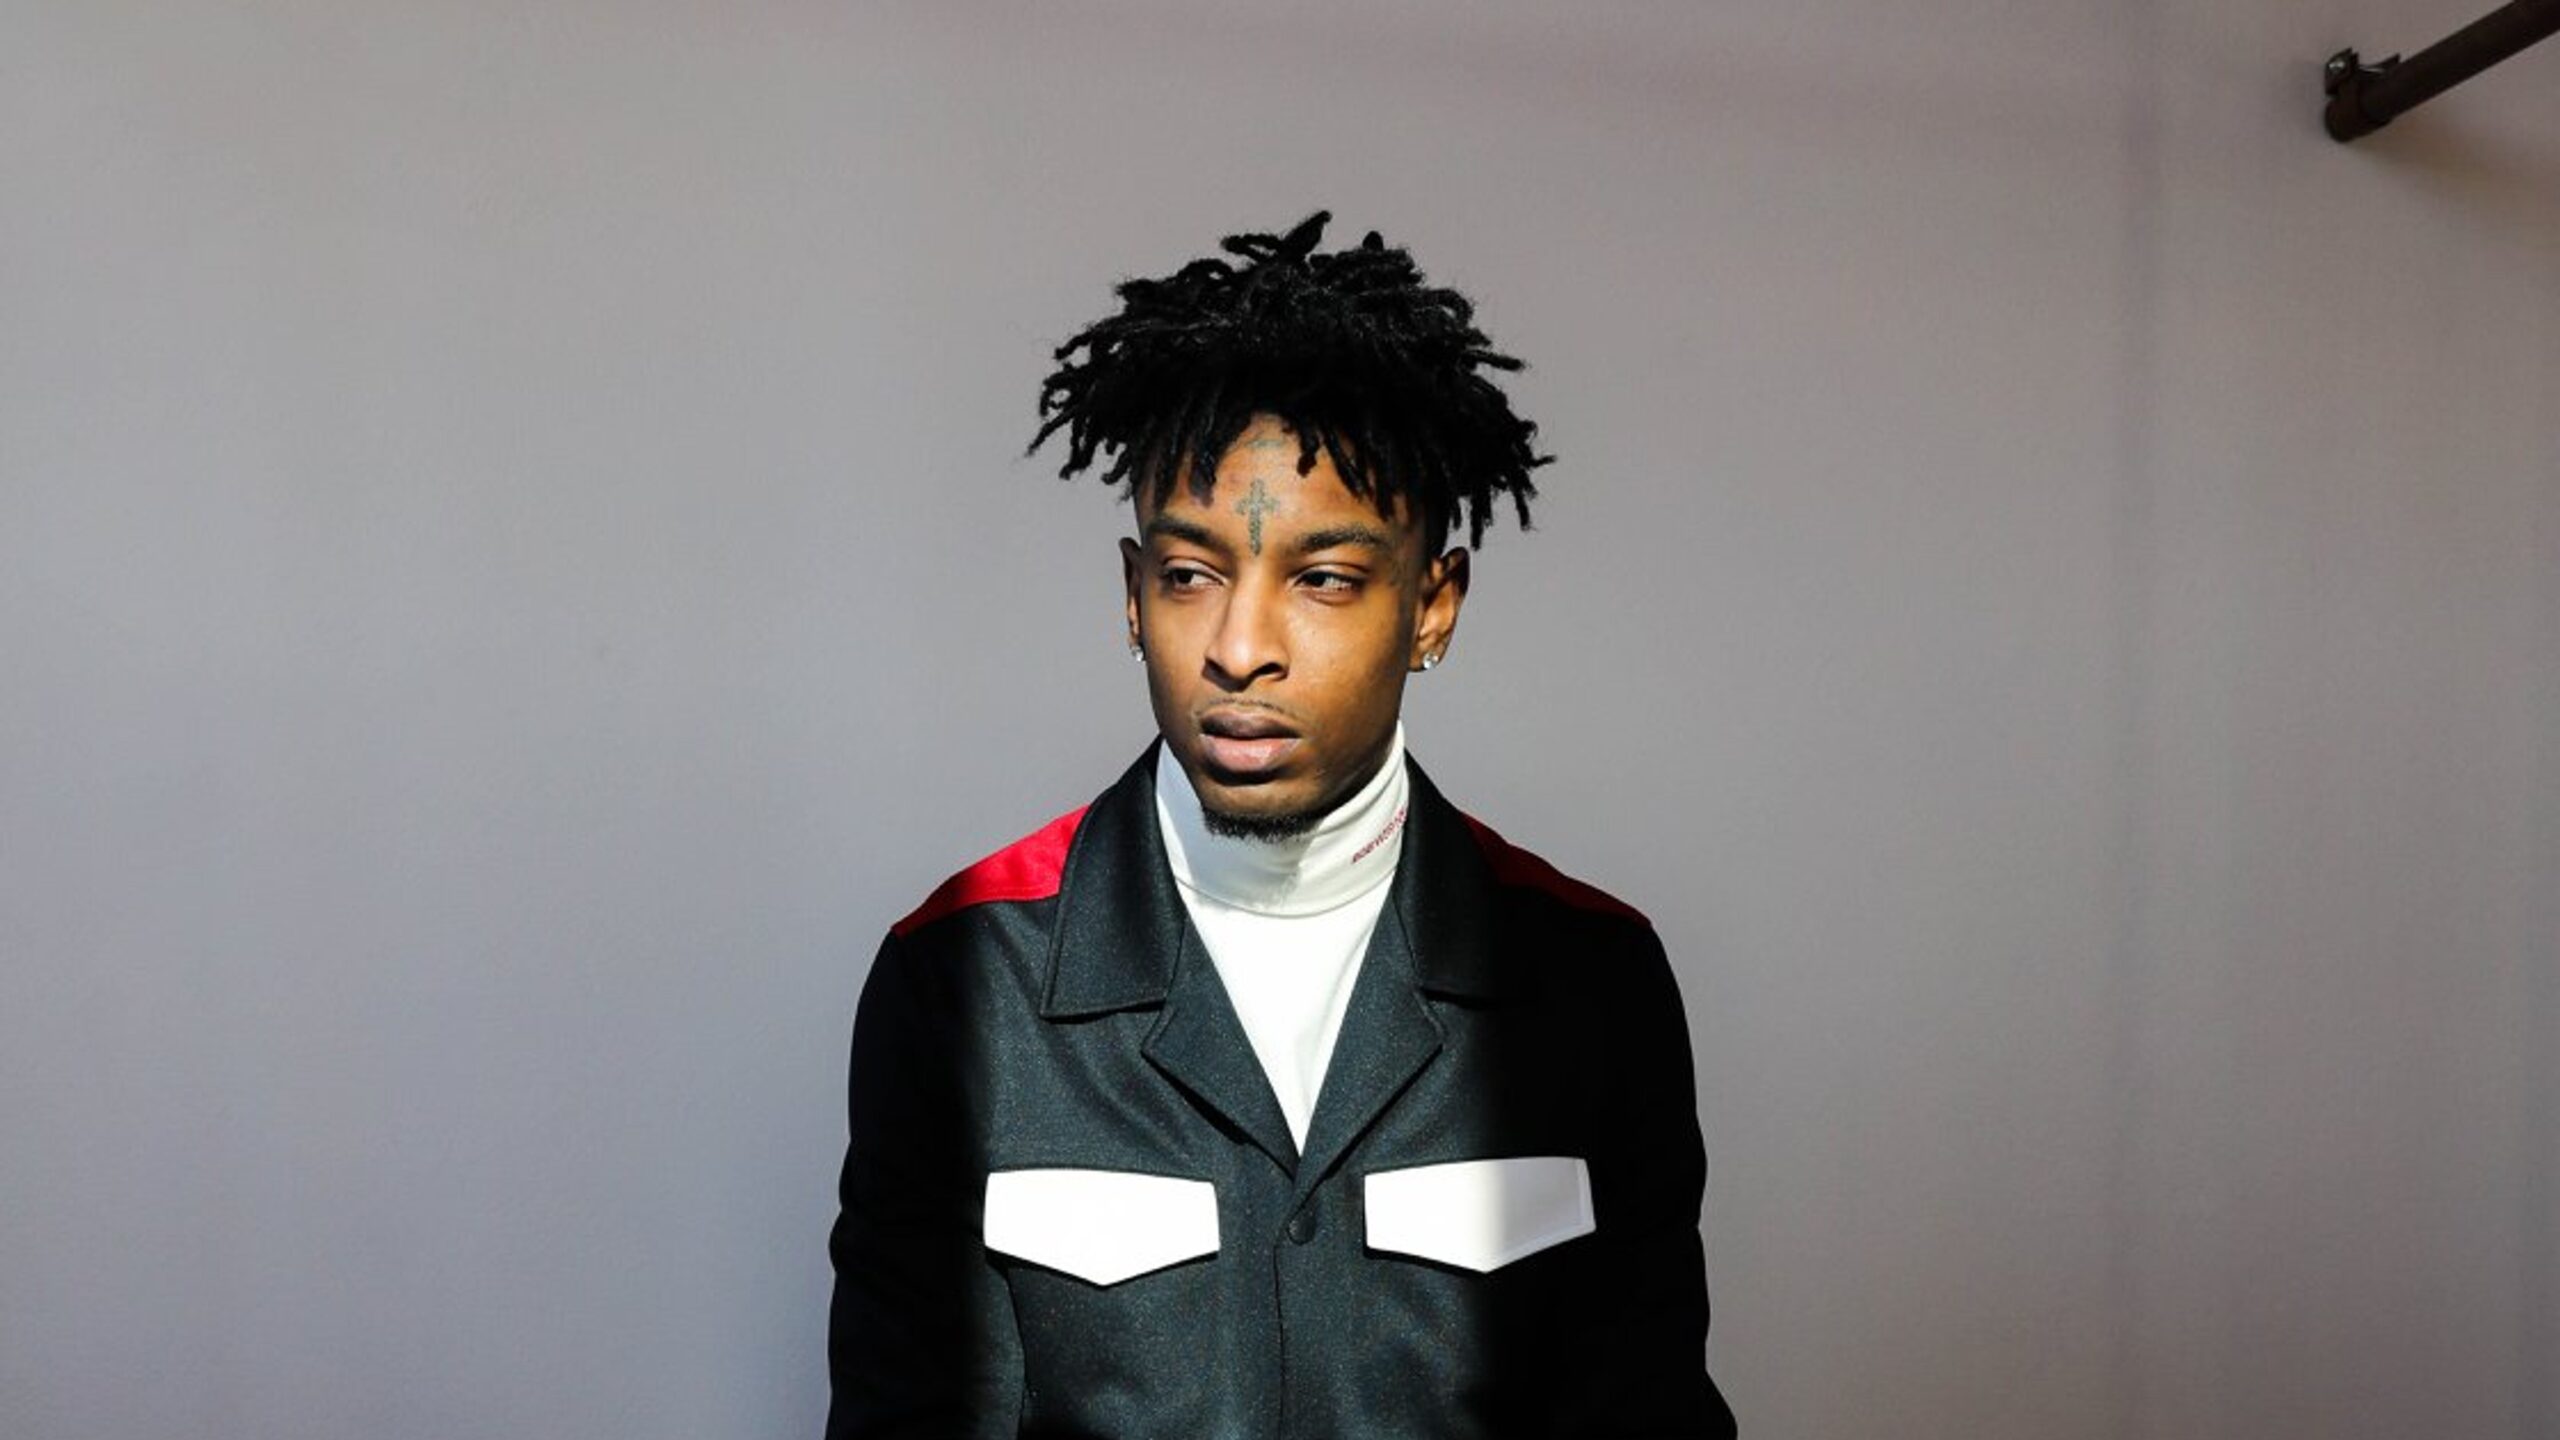 112 Surprise 21 Savage With Legendary Performance At 70s Style Birthday  Bash - The Source